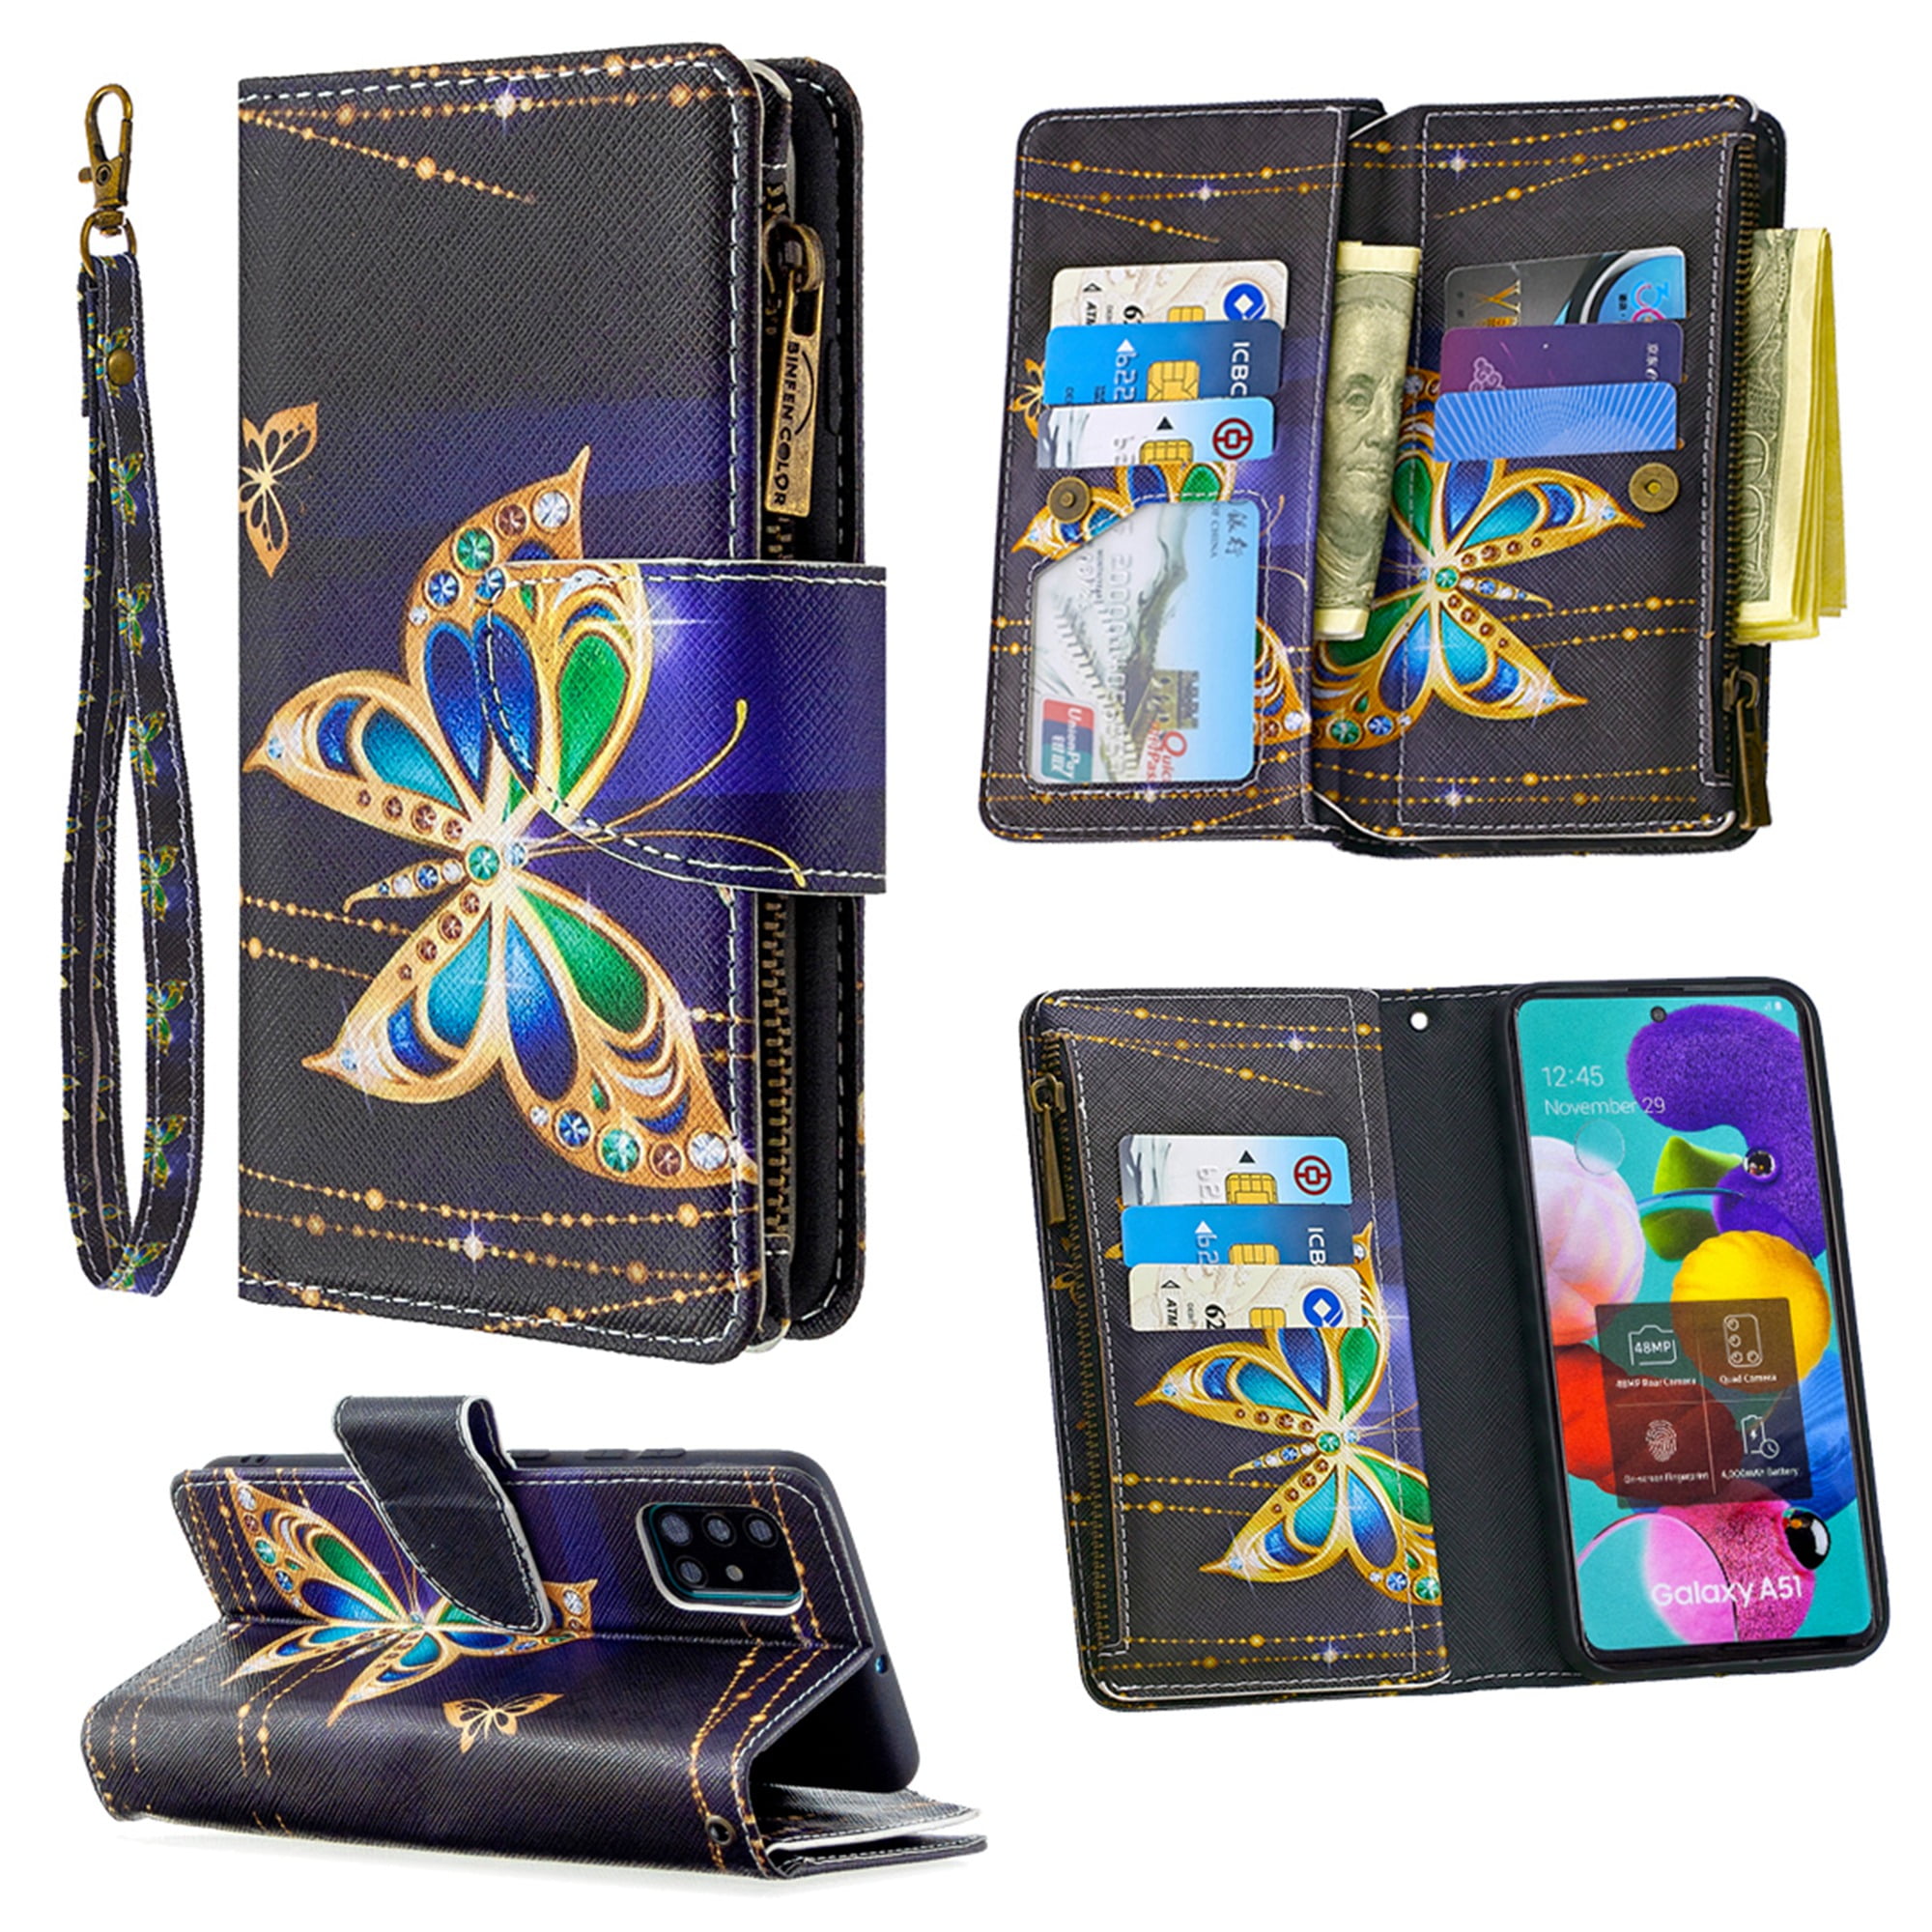 Samsung Galaxy A6 2018 Case Shockproof Premium Slim PU Leather Flip Pouch Wallet Silicone Cover with Magnetic Stand Card Holder Slot Protective Phone Cases for Samsung Galaxy A6 Elephant